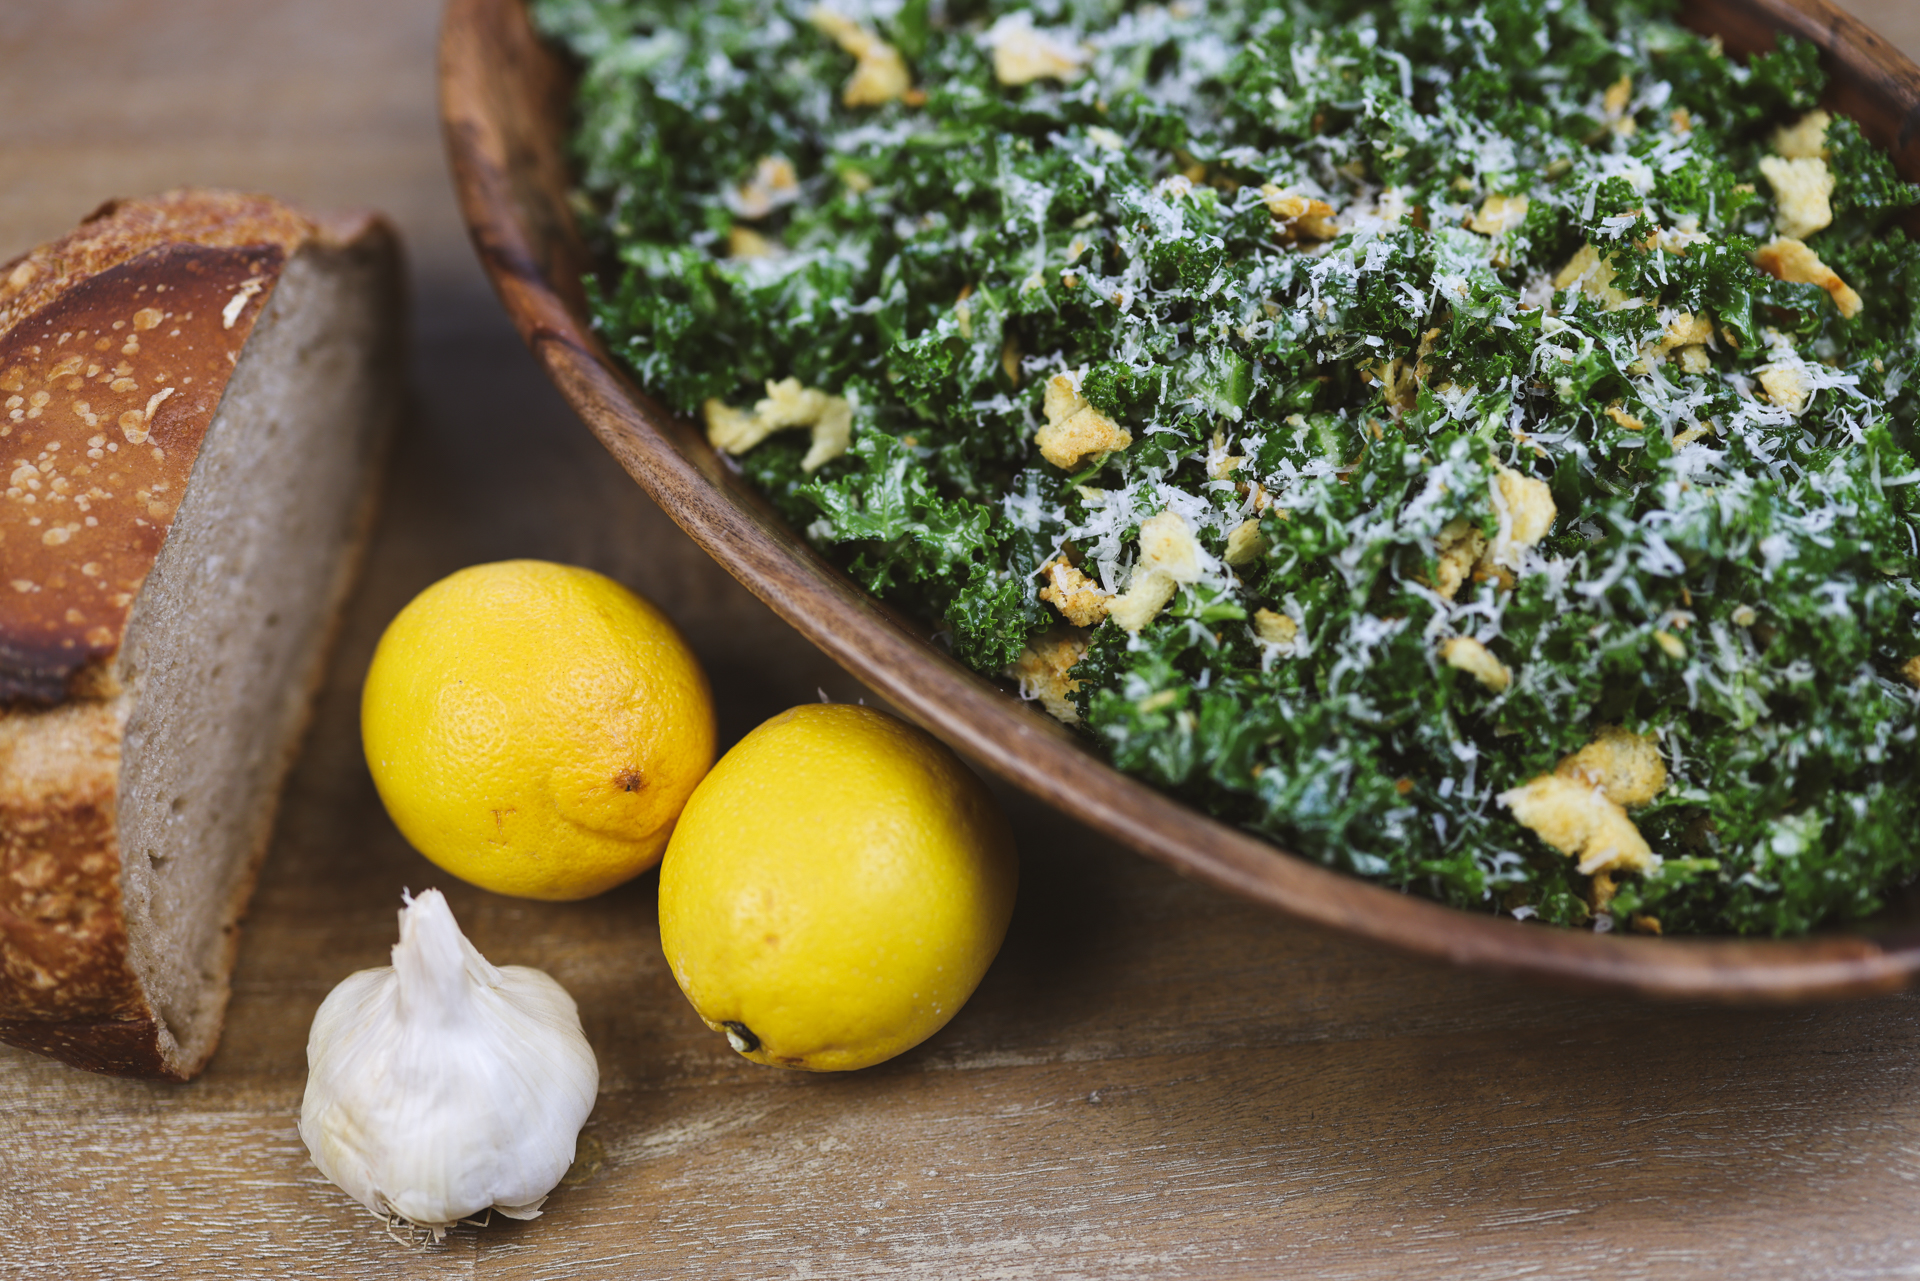 The Kale “caesar” that will make you like kale